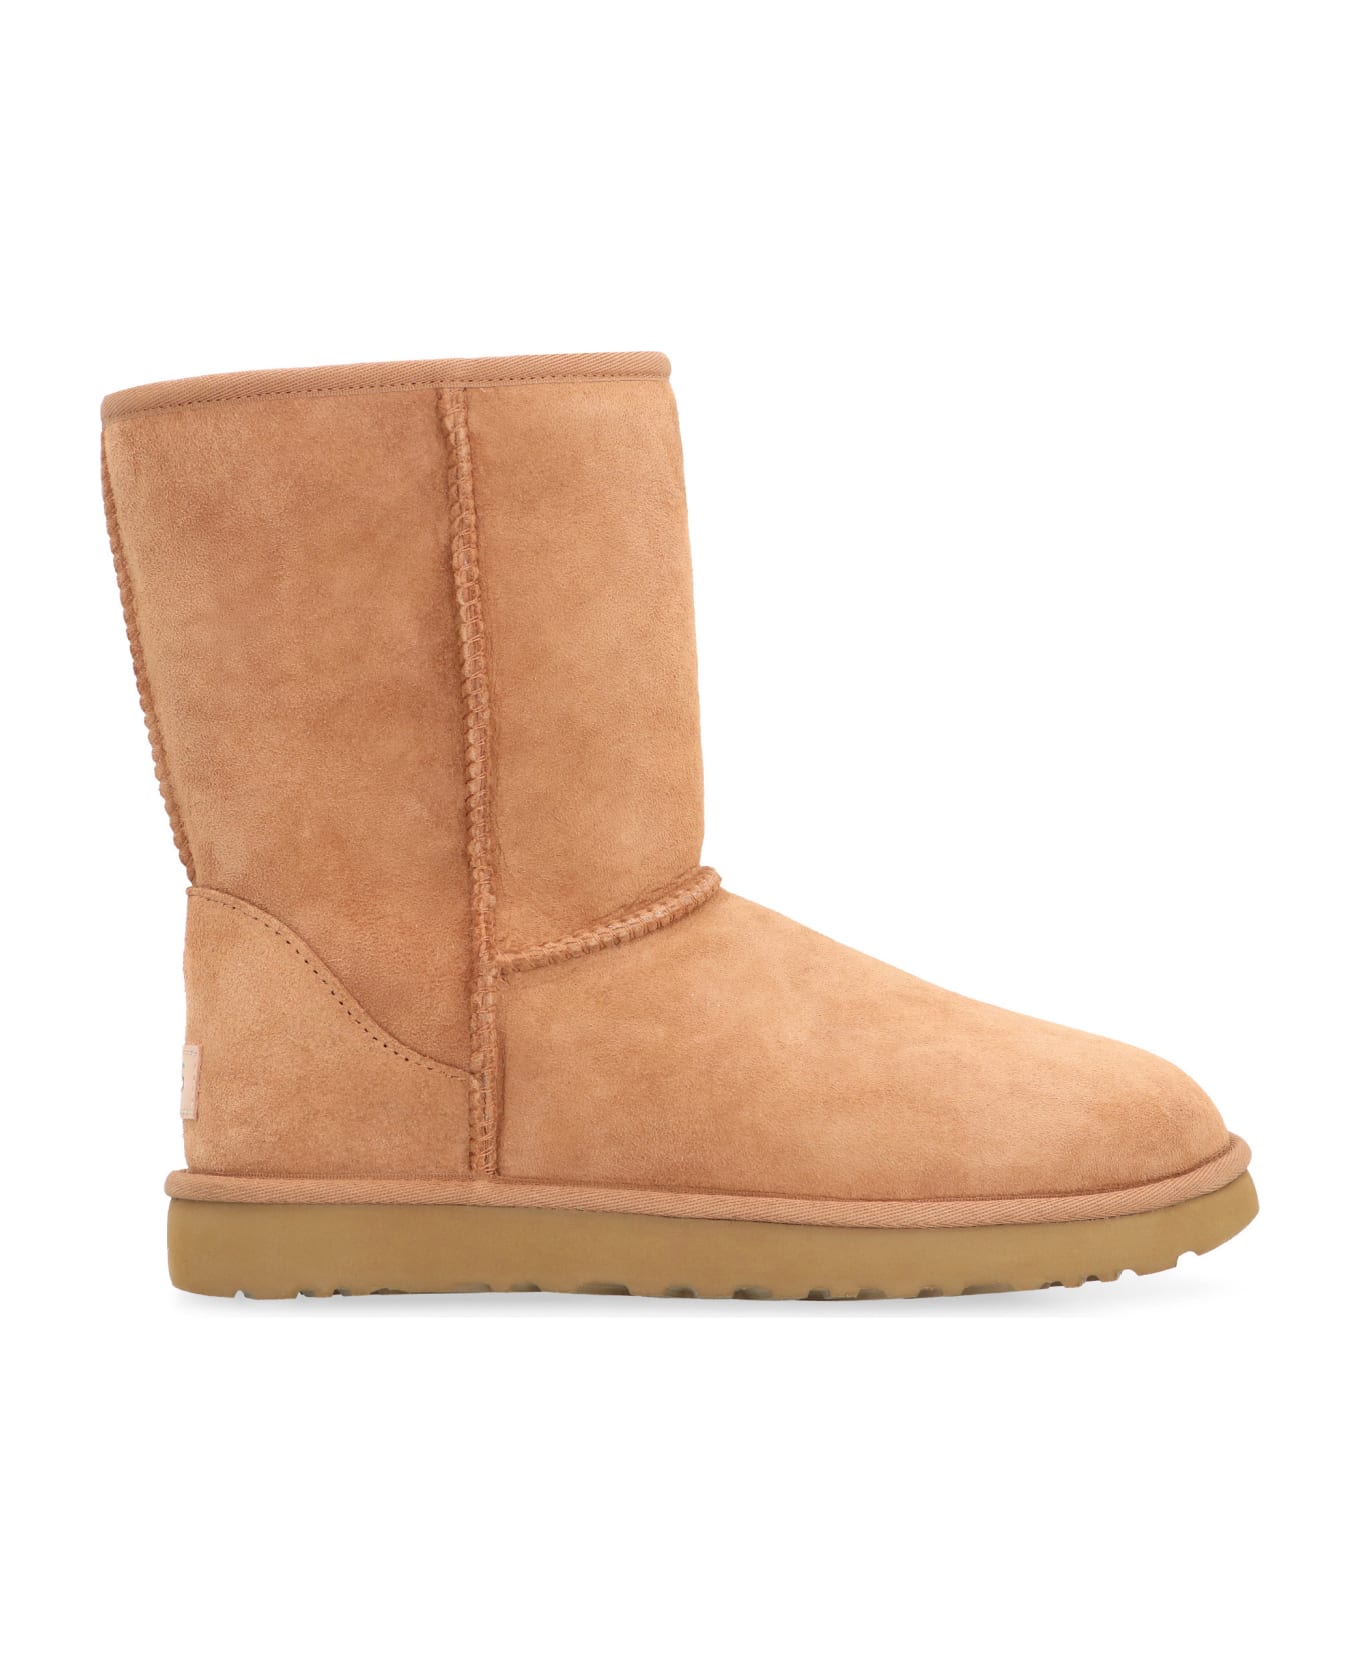 UGG Classic Short Ii Ankle Boots - CHESTNUT